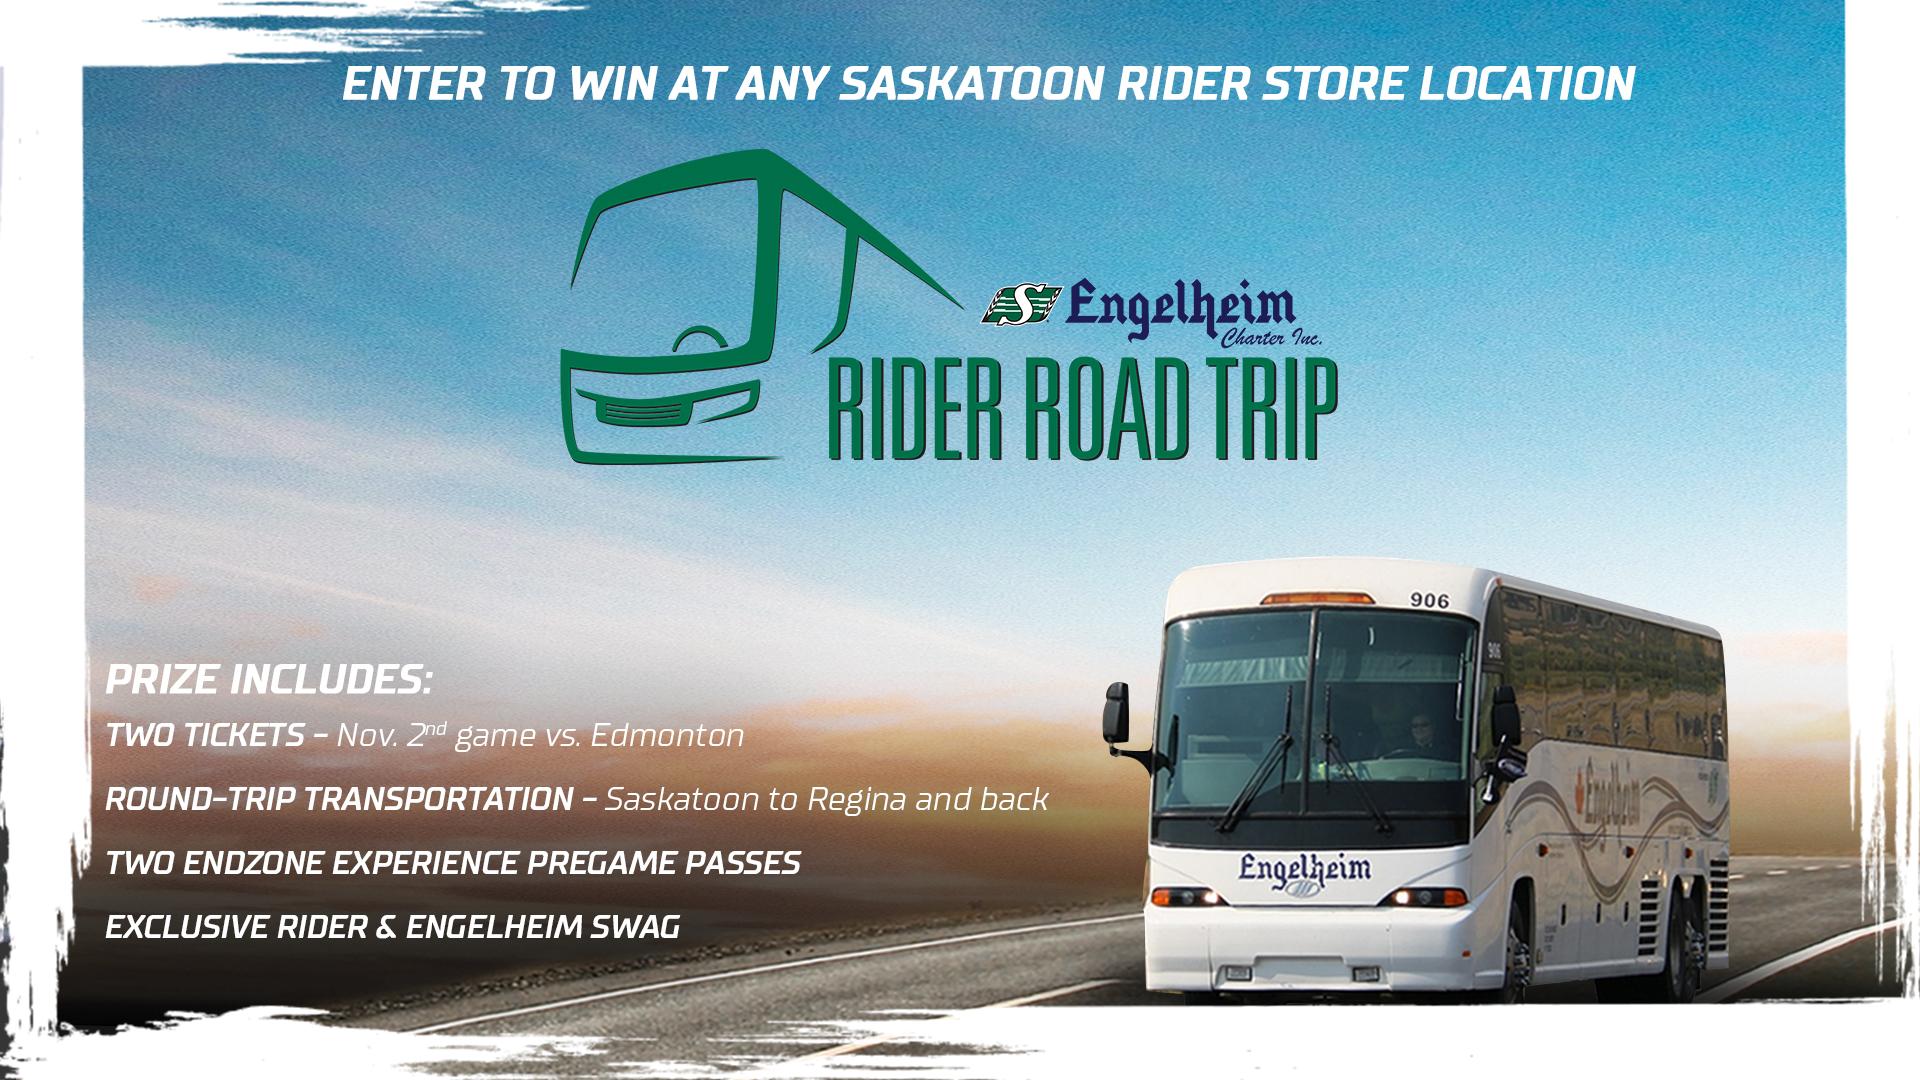 Saskatchewan Roughriders On Don T Forget You Can Enter